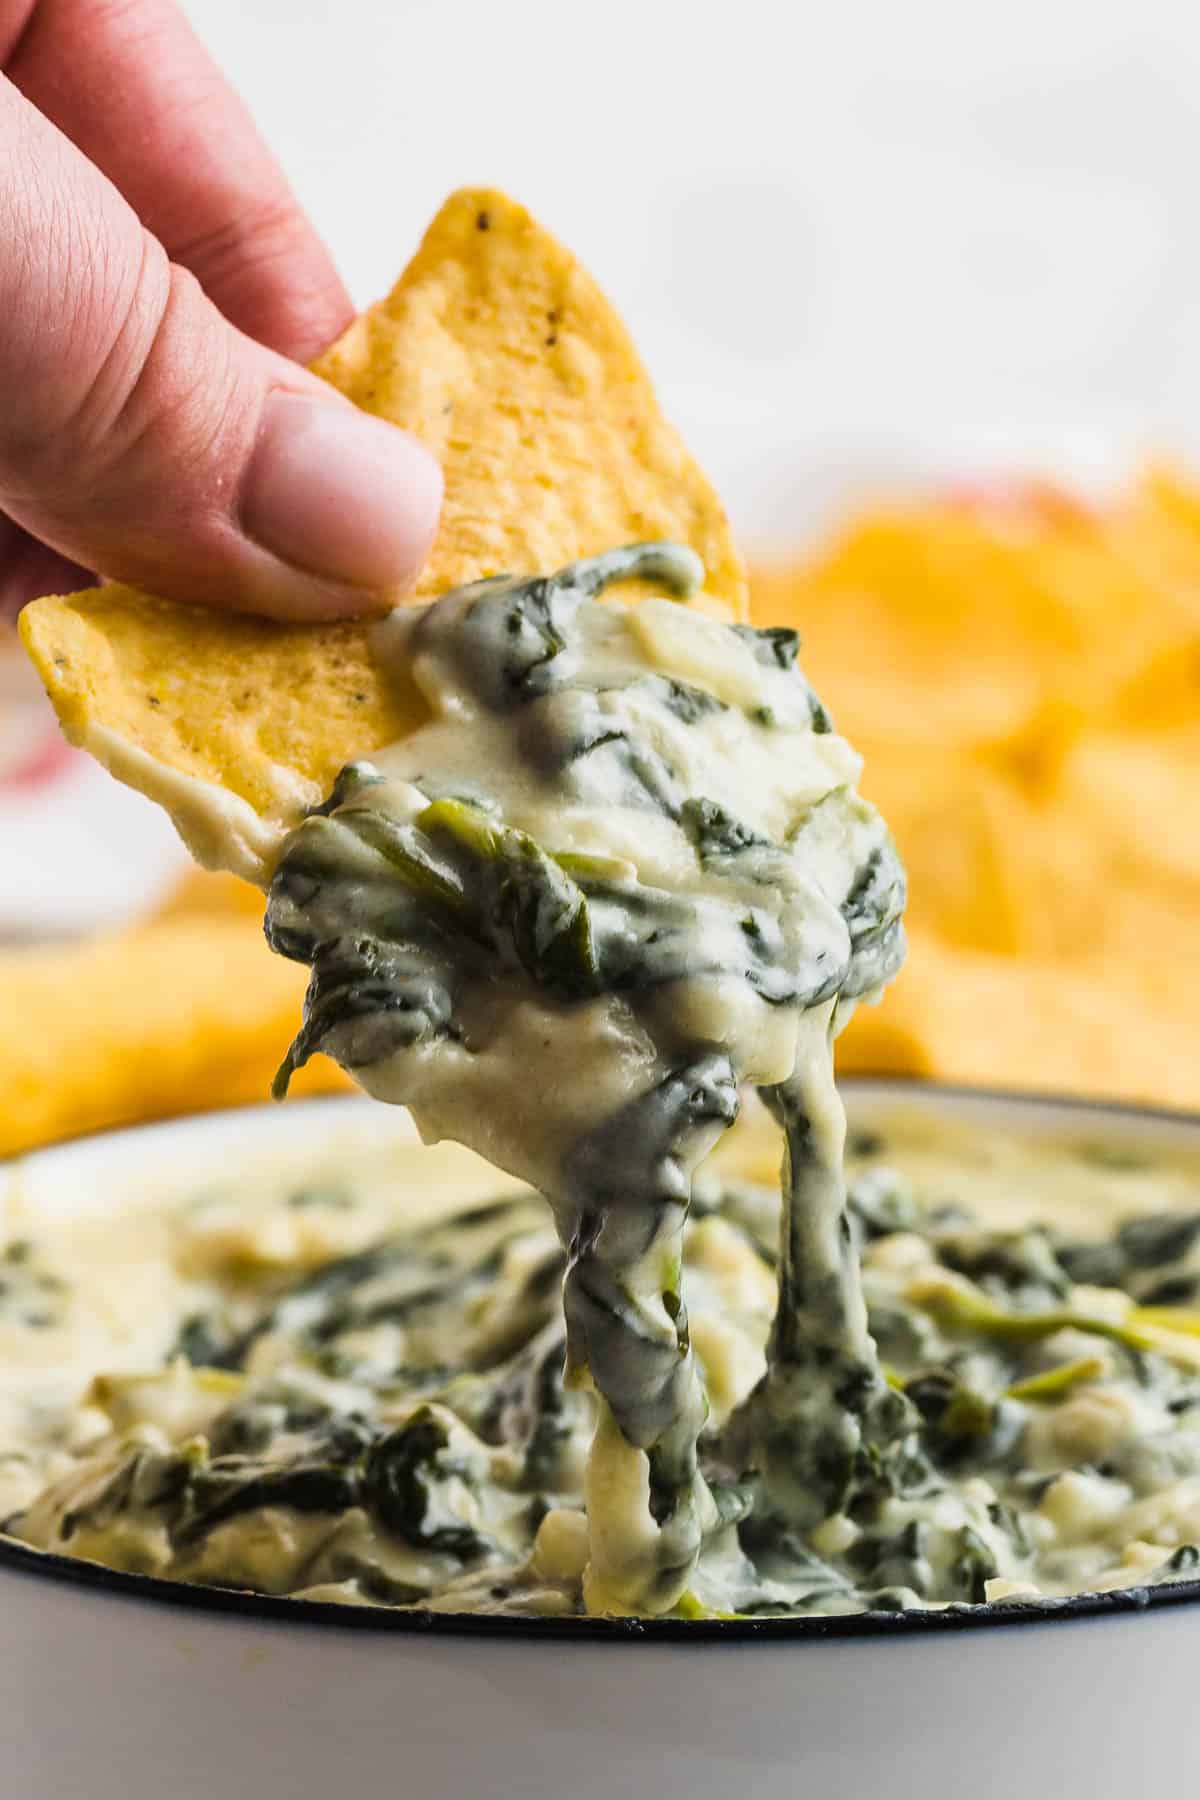 Spinach Dip ready for dipping!